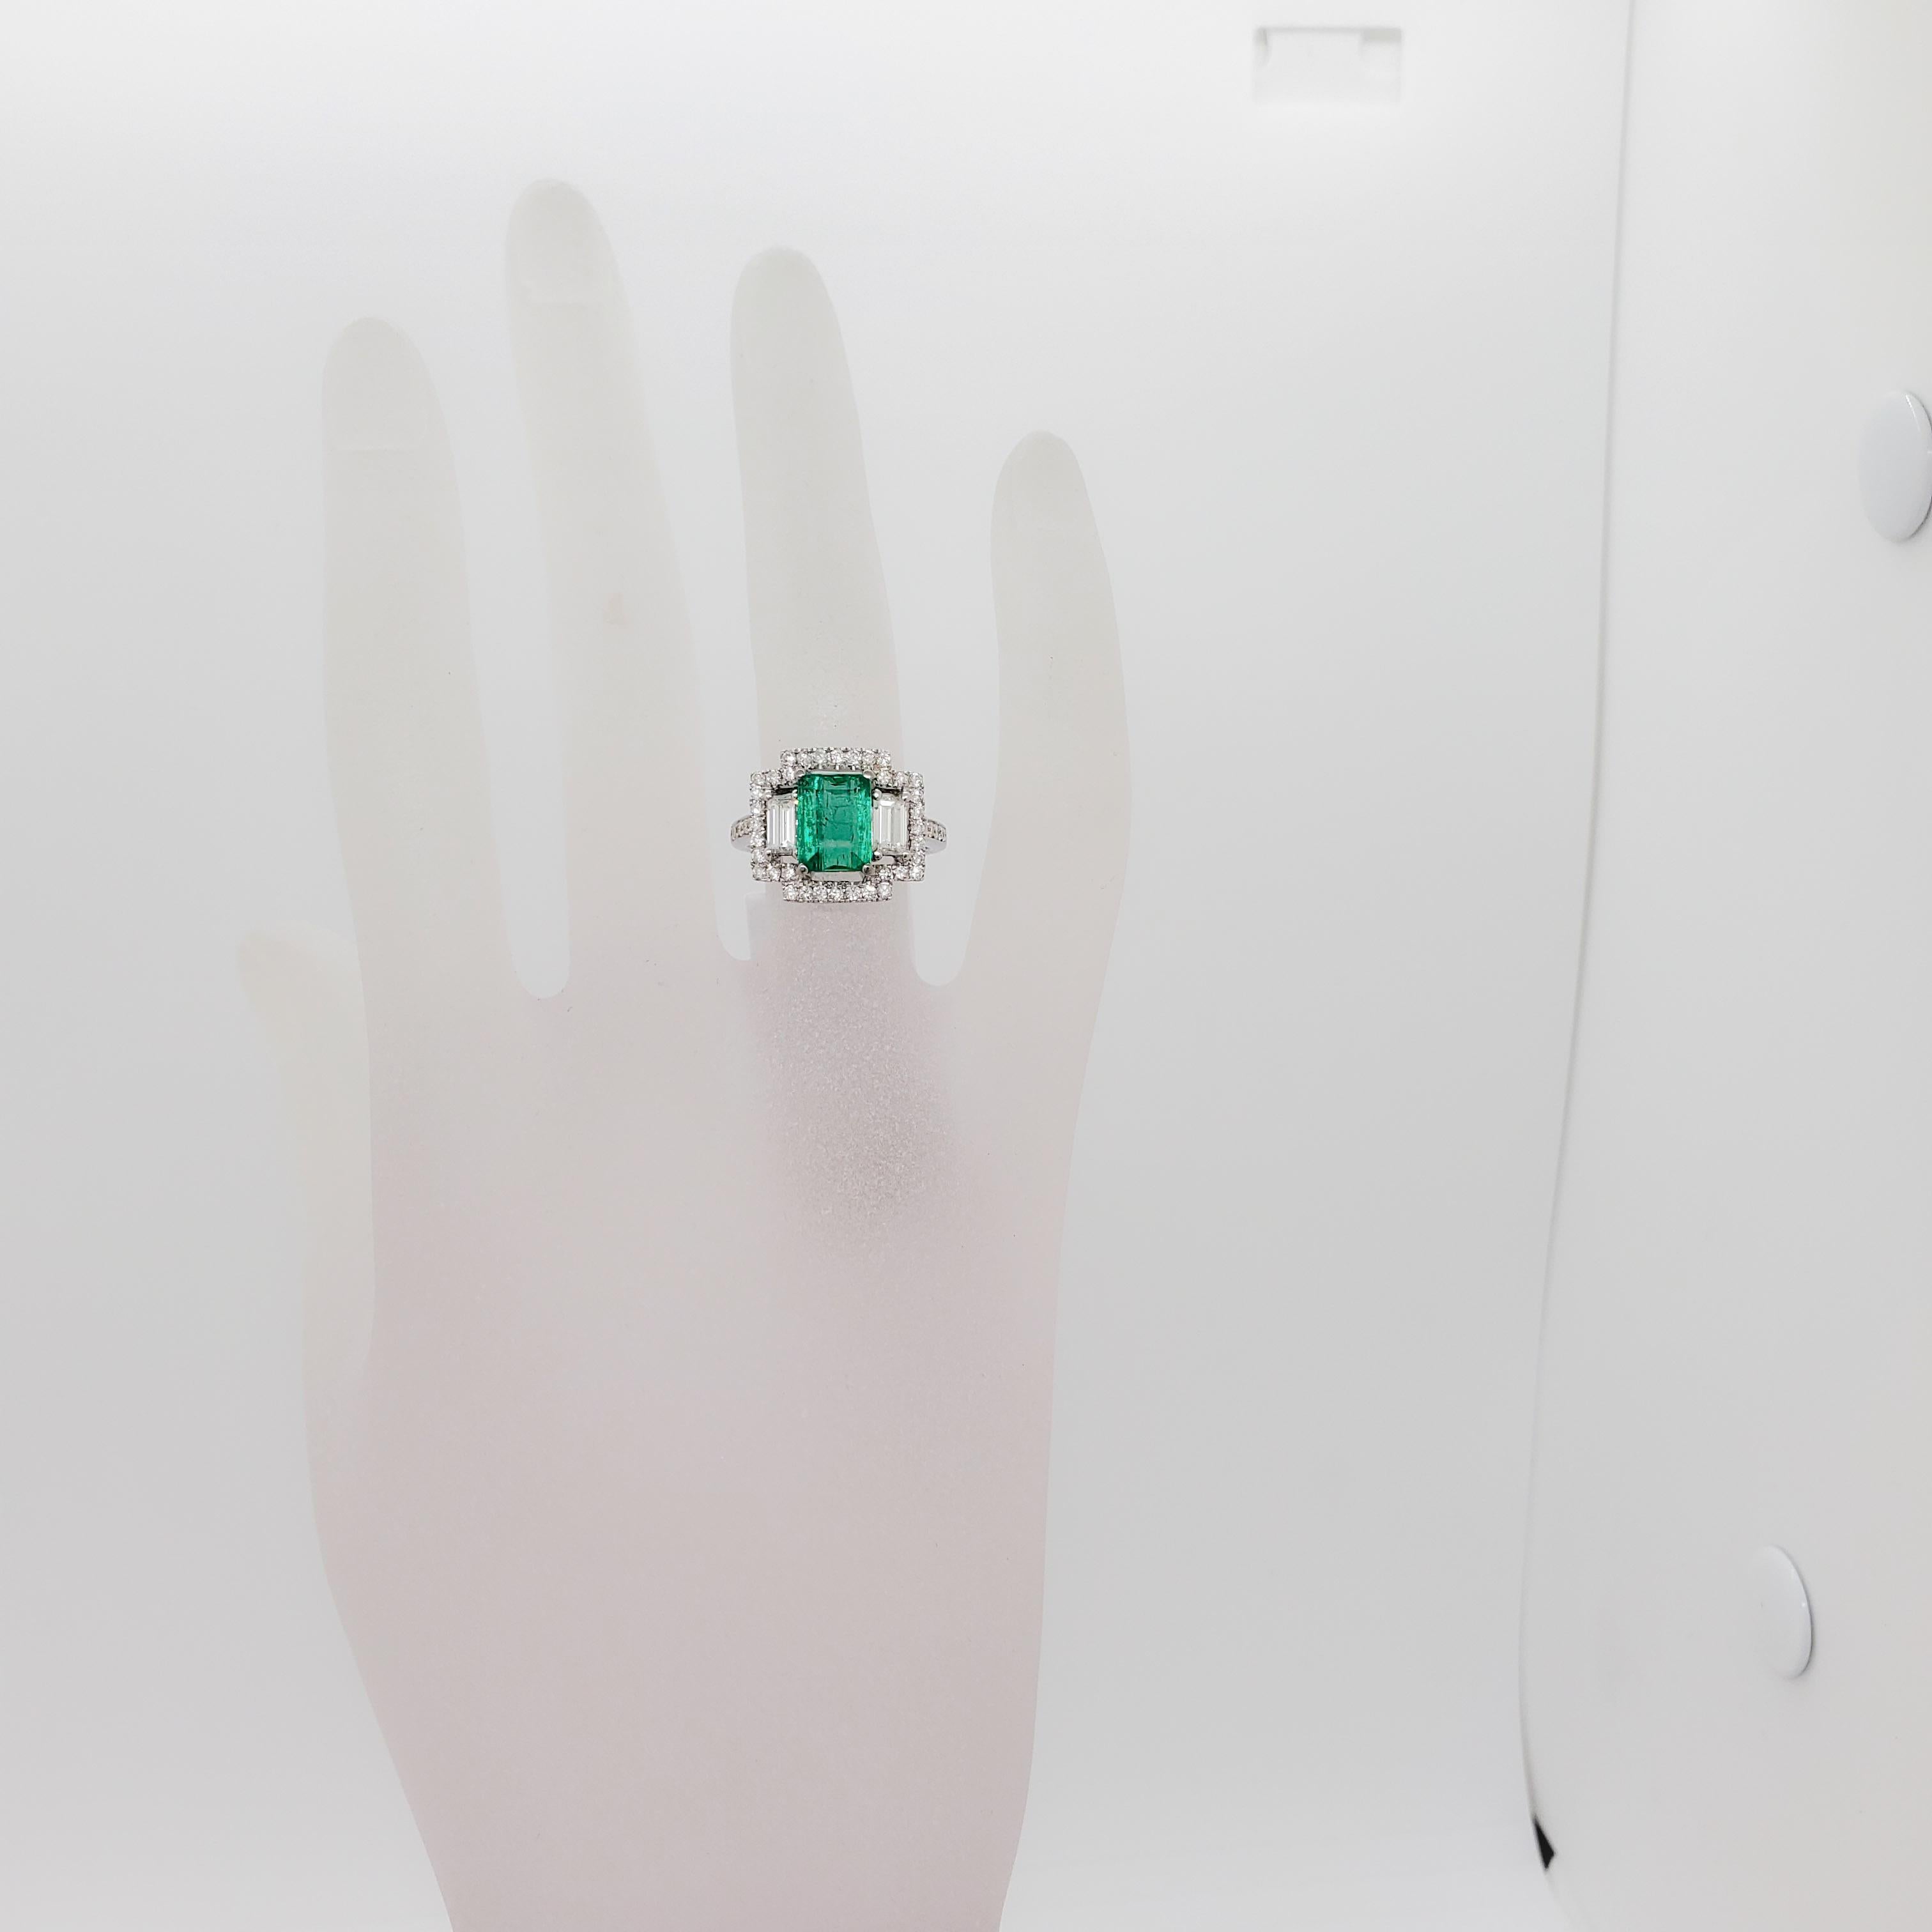 Beautiful bright green emerald emerald cut weighing 2.05 ct. with 1.14 ct. of good quality white diamond rounds. Handmade 18k white gold mounting in size 6. Well made and easy to wear daily or for a special occasion.